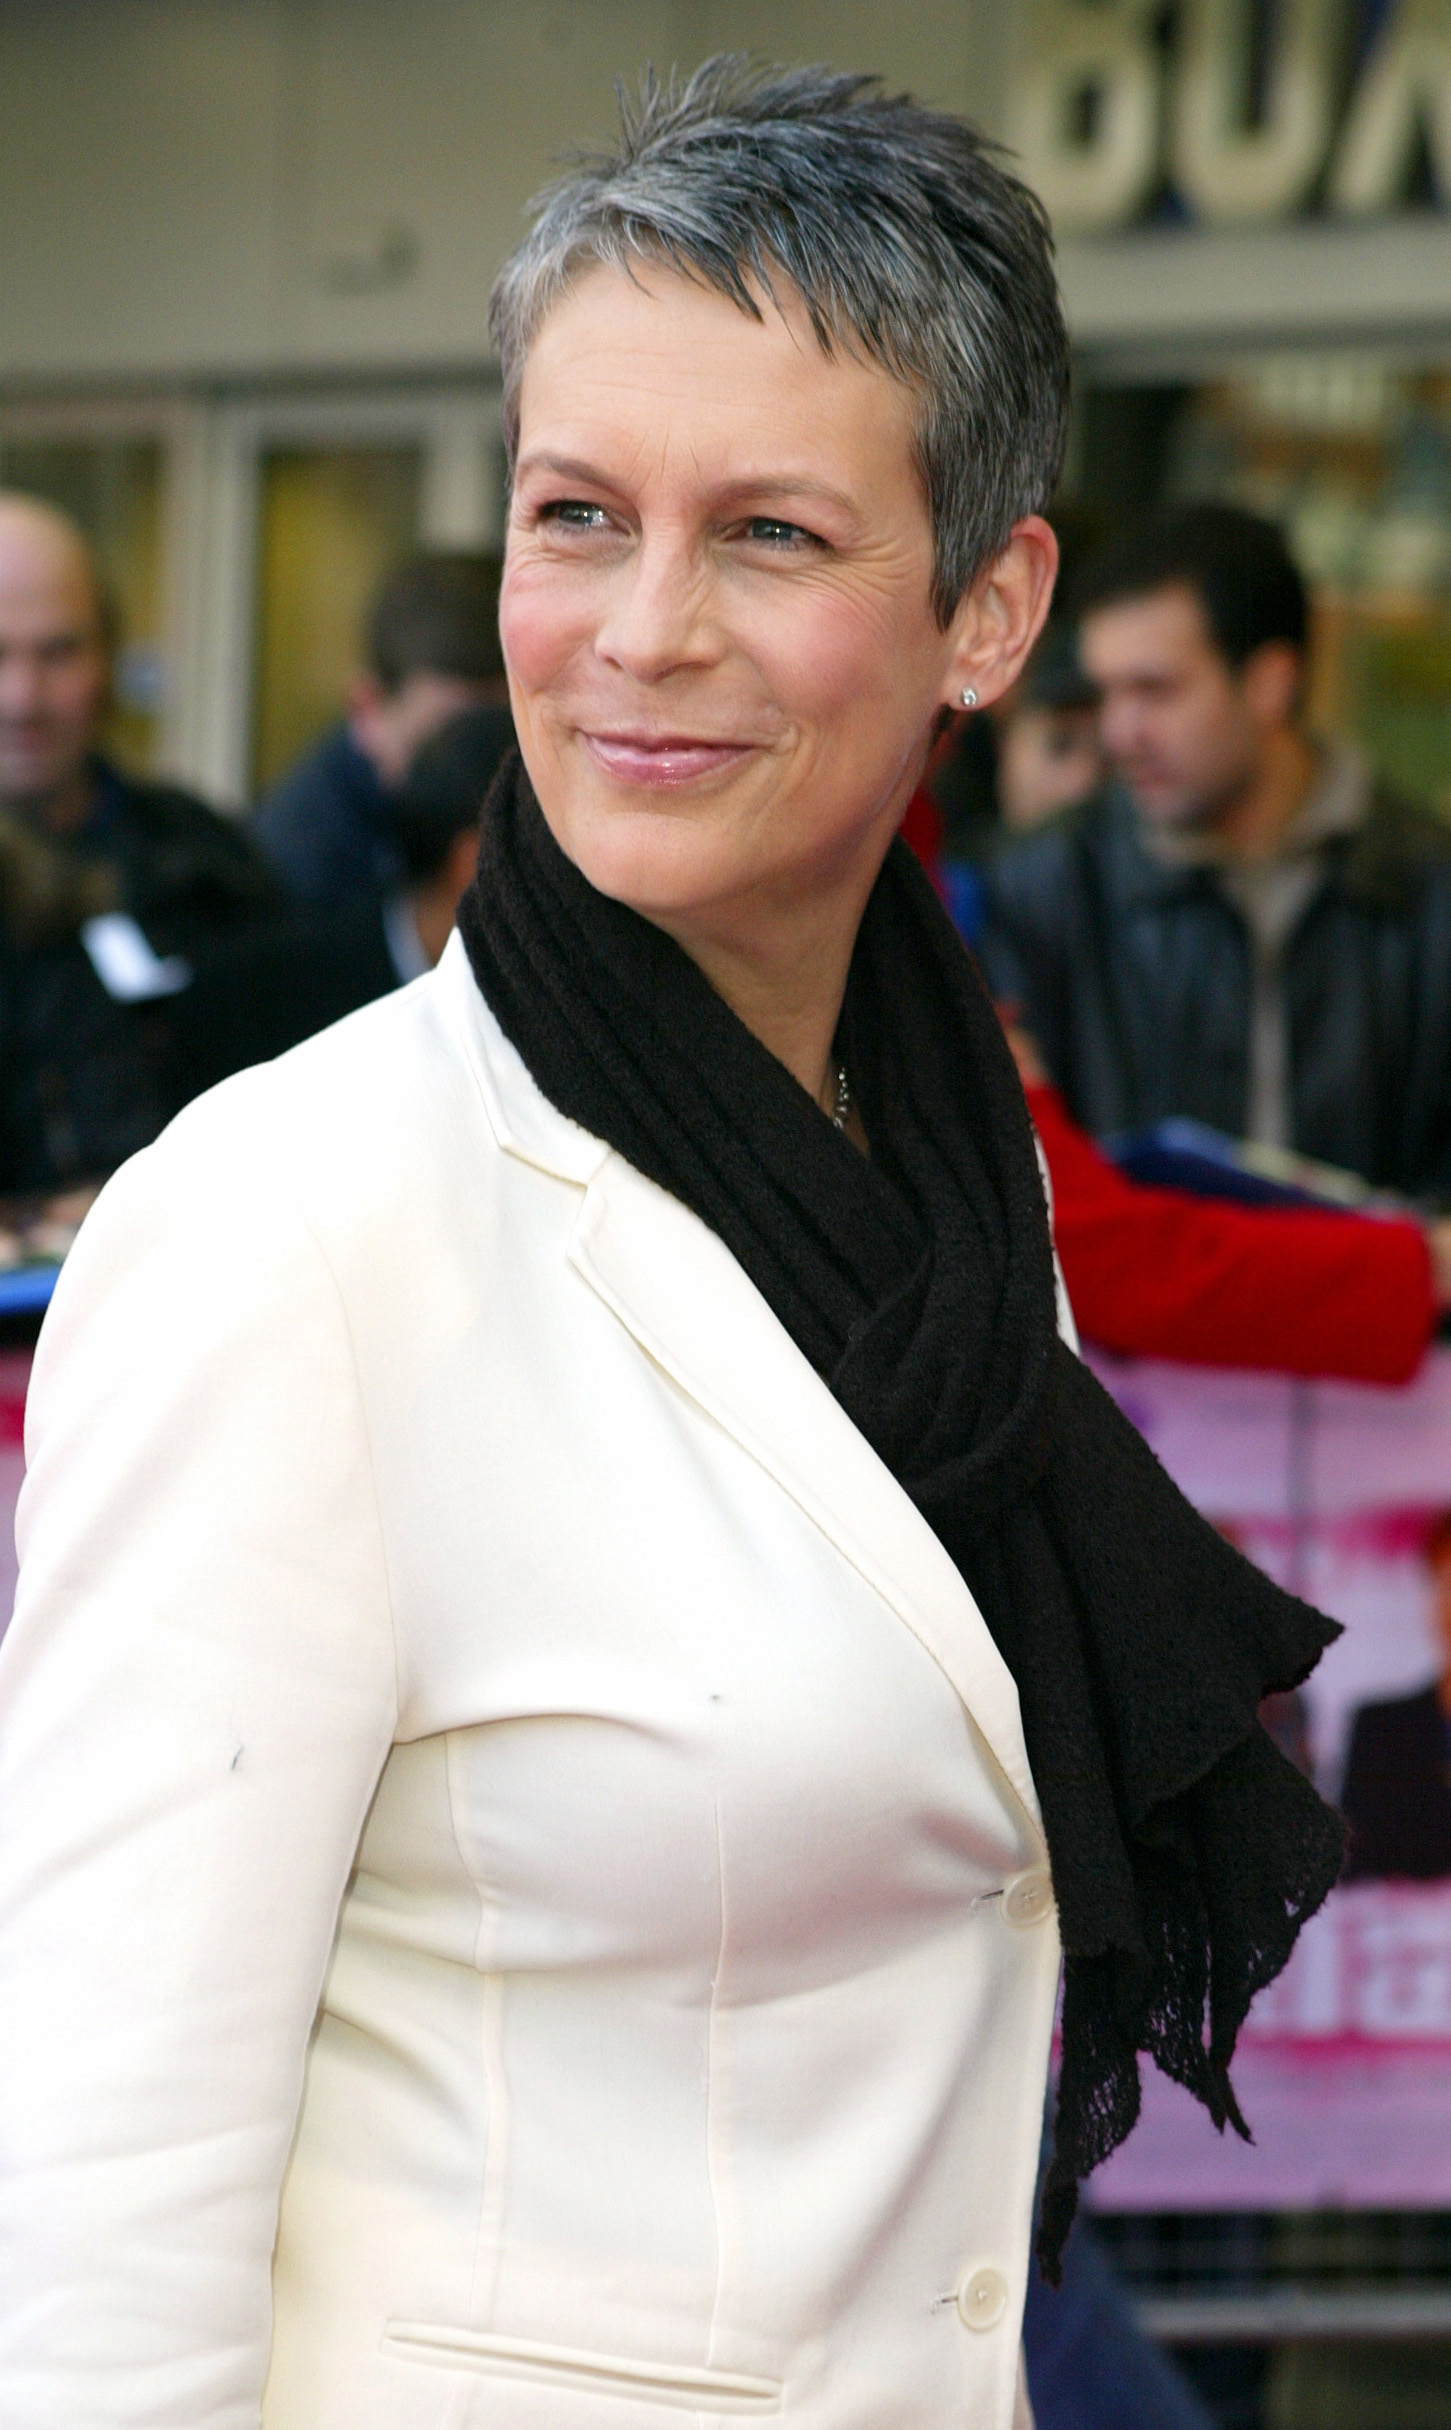 Jamie Lee Curtis bei der "Freaky Friday" Premiere in London am 14. Dezember 2003 | Quelle: Getty Images